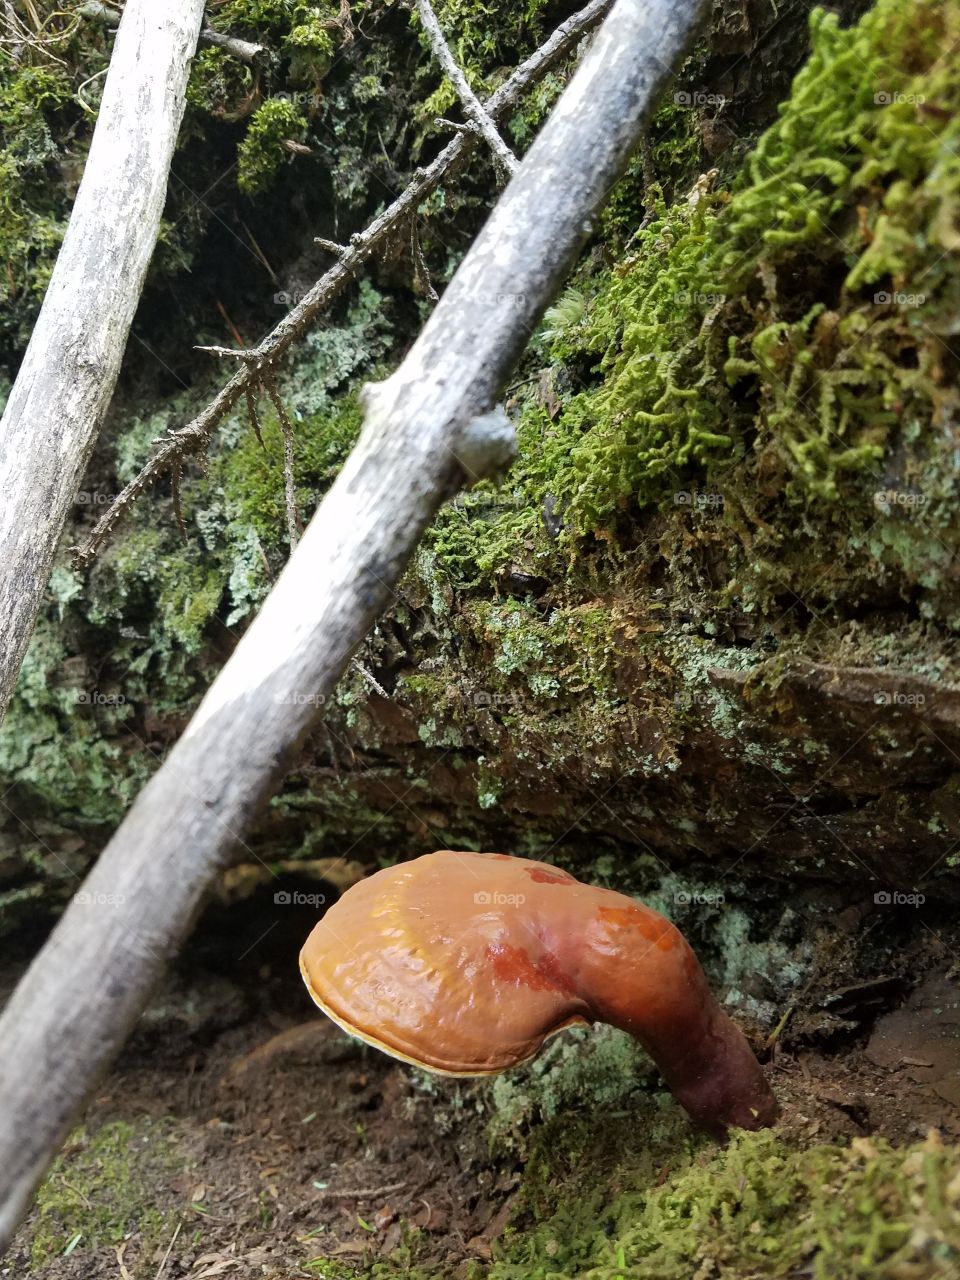 mushroom grows in a forest with moss on stones